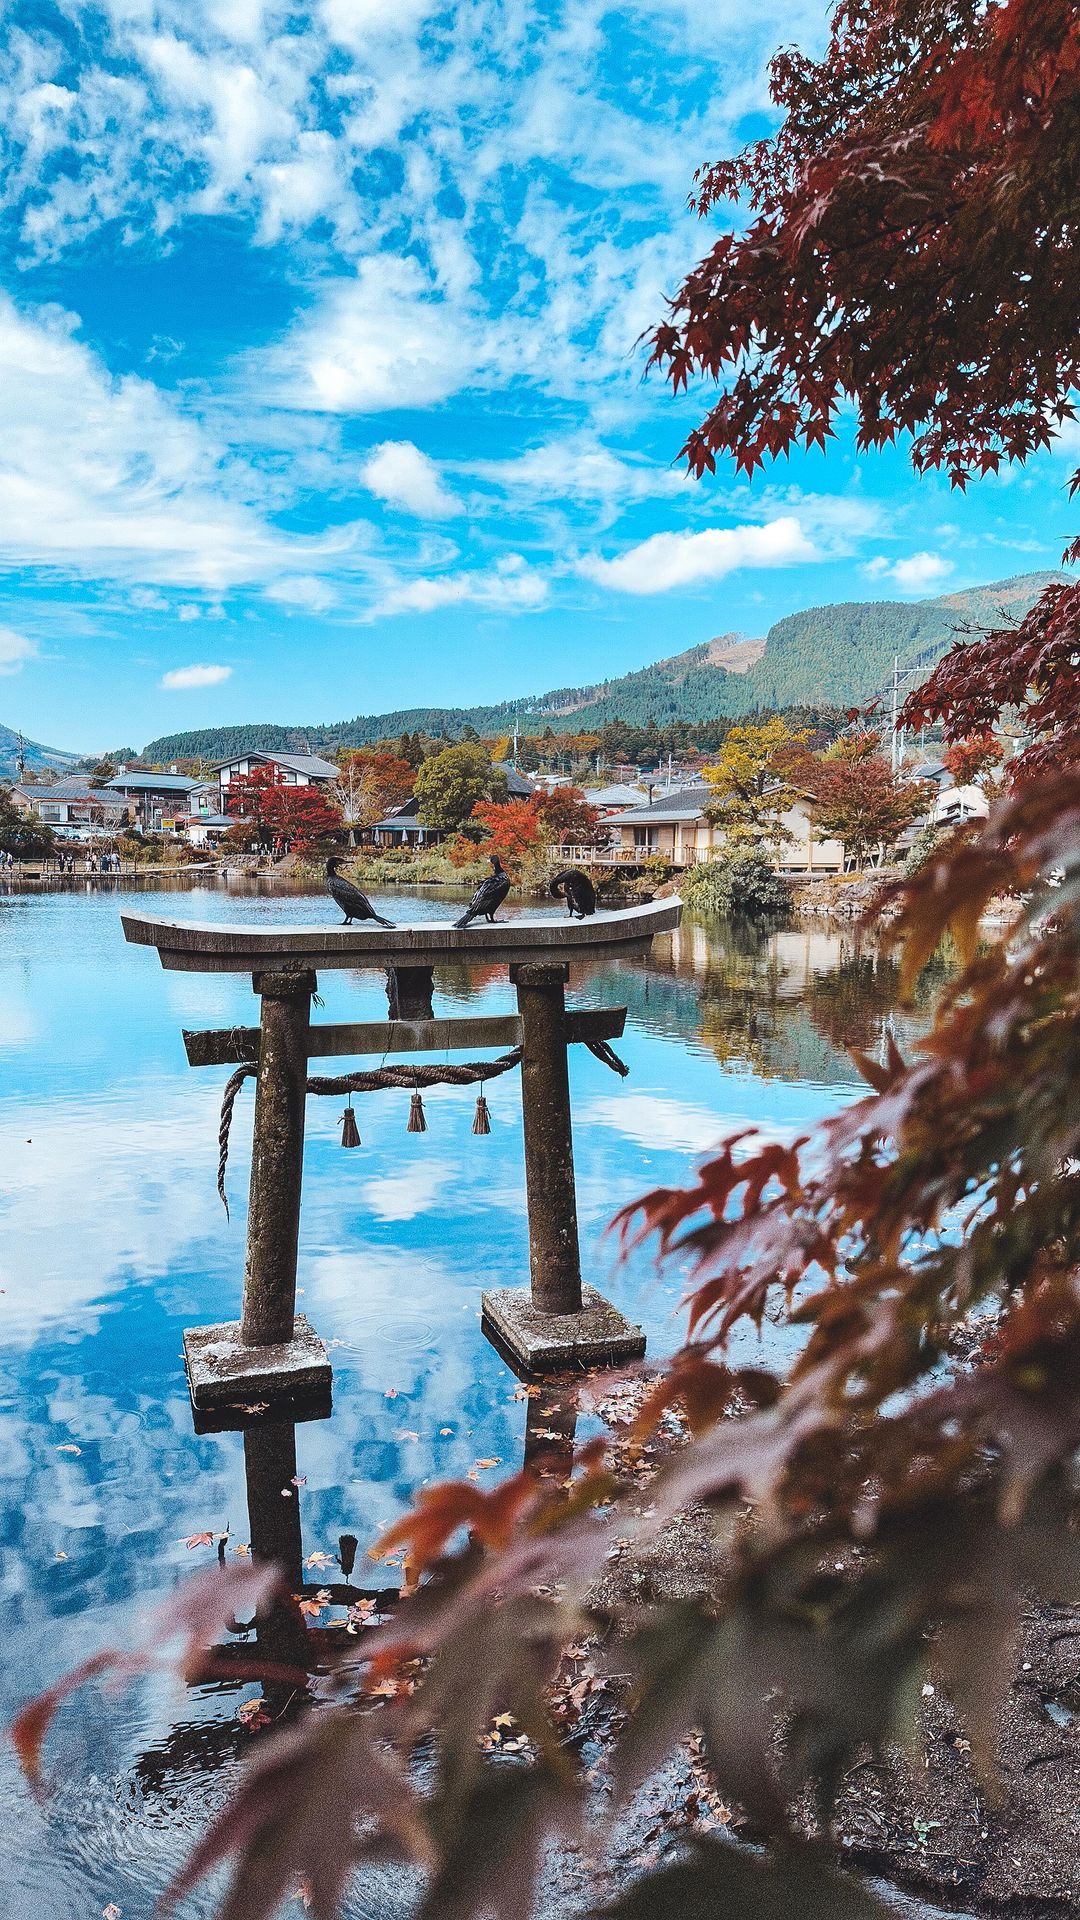 Cultural Immersion in Yufu: Markets, Crafts & Onsen Delights